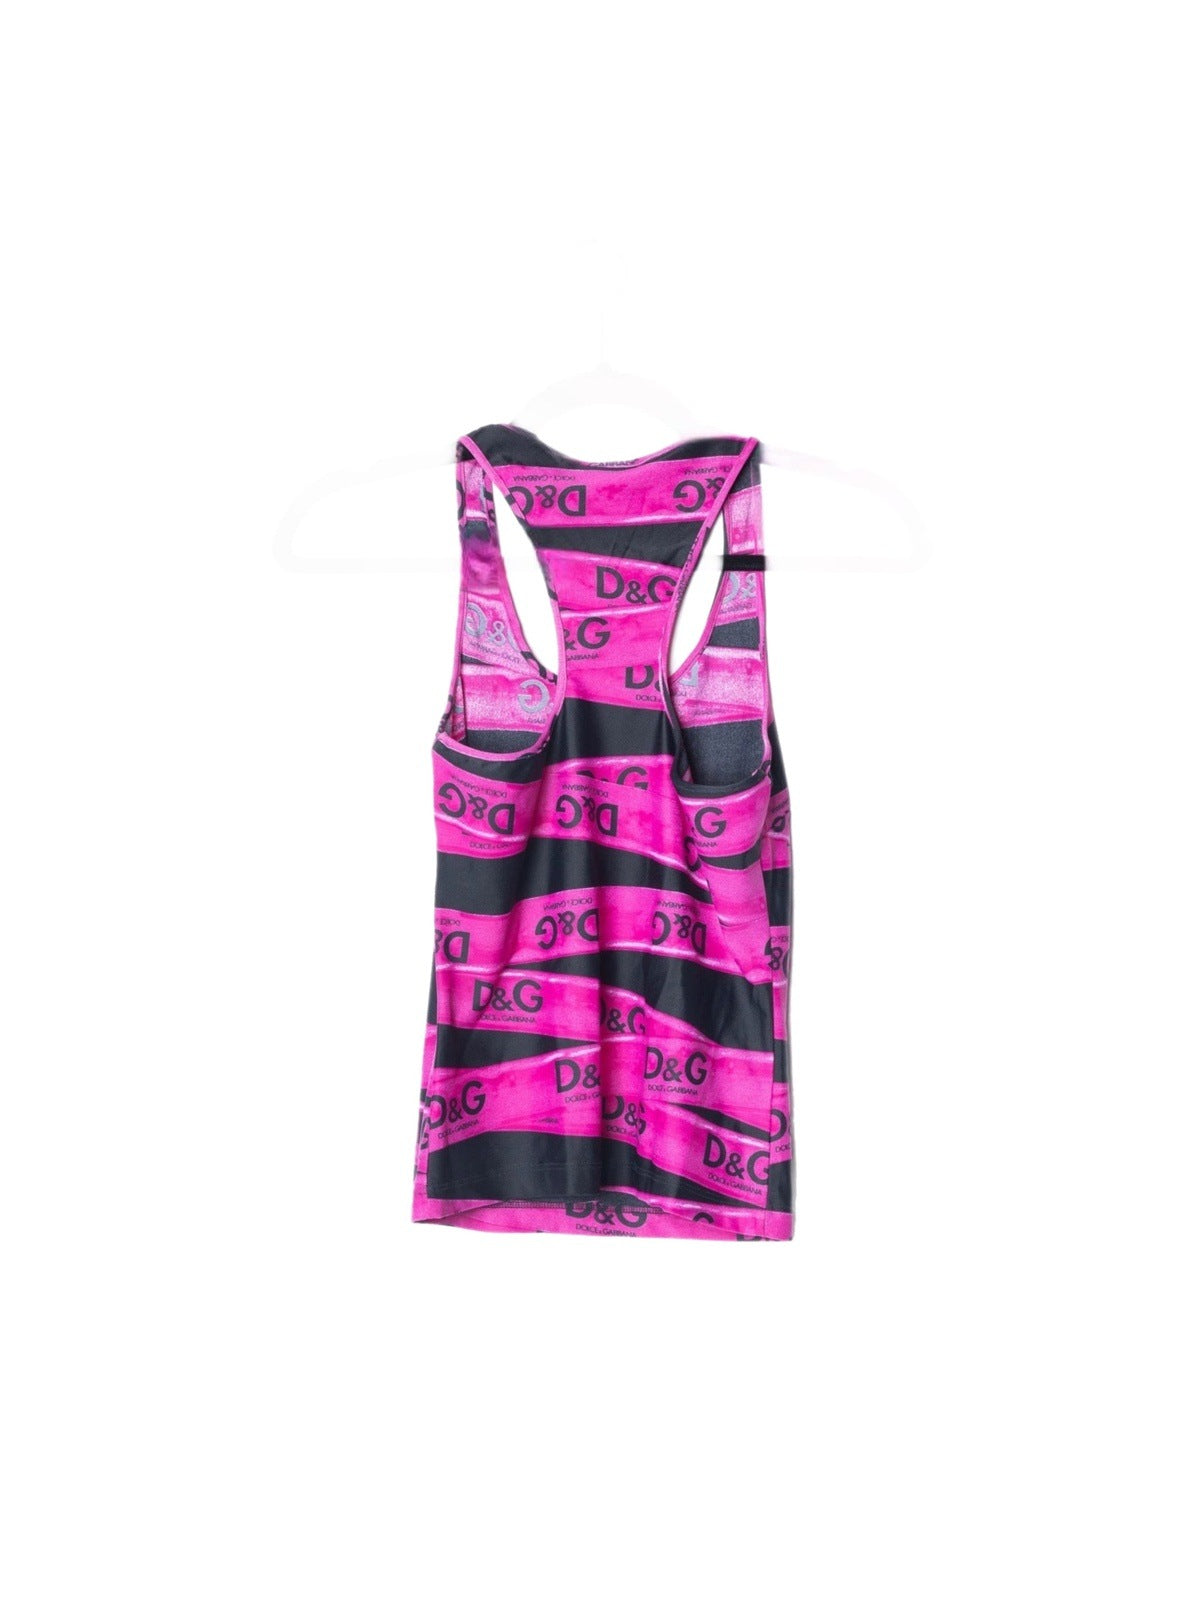 D&G Pink/Black Caution Tape Tank - Black/pink color, XS 24/38. Stretchy bathing suit material. Good vintage condition.